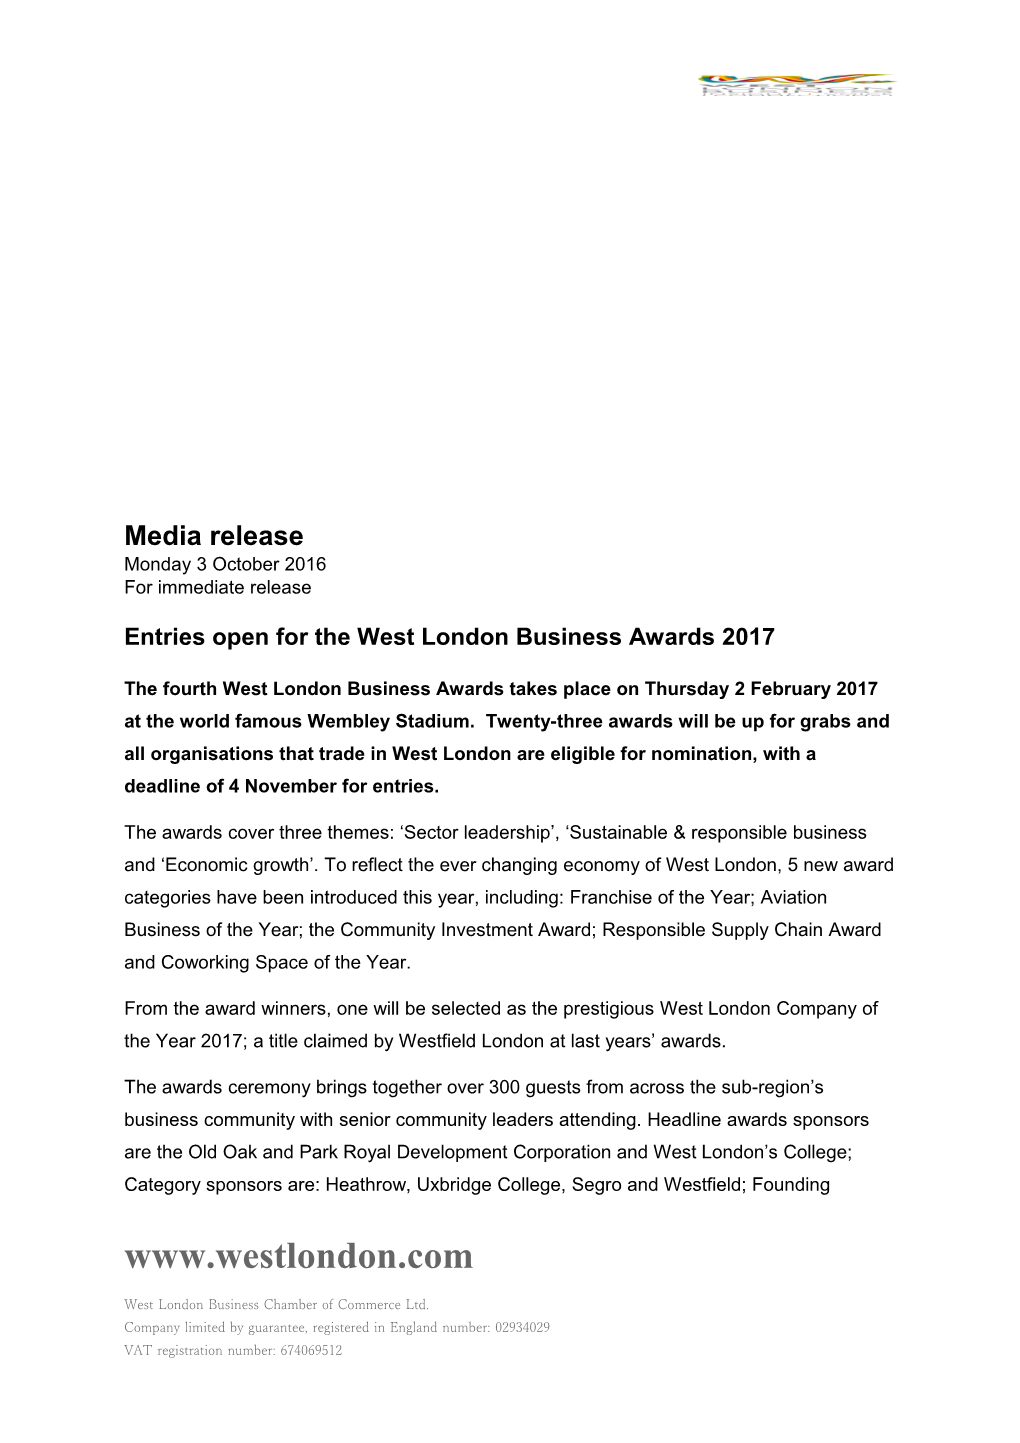 Entries Open for the West London Business Awards 2017